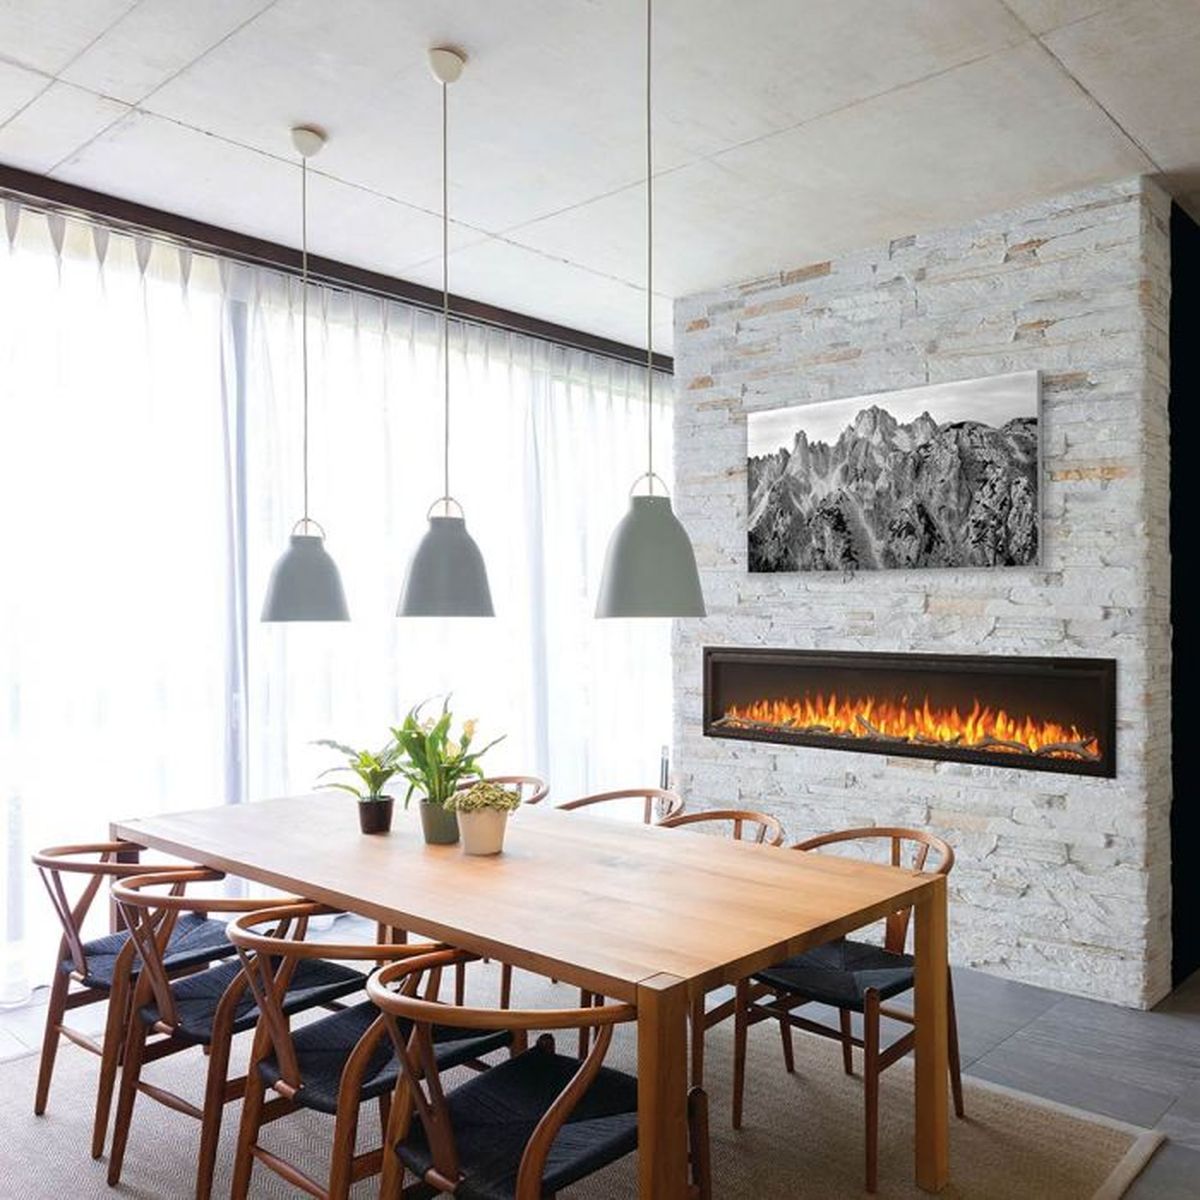 Napoleon Entice Electric Fireplace in dining room